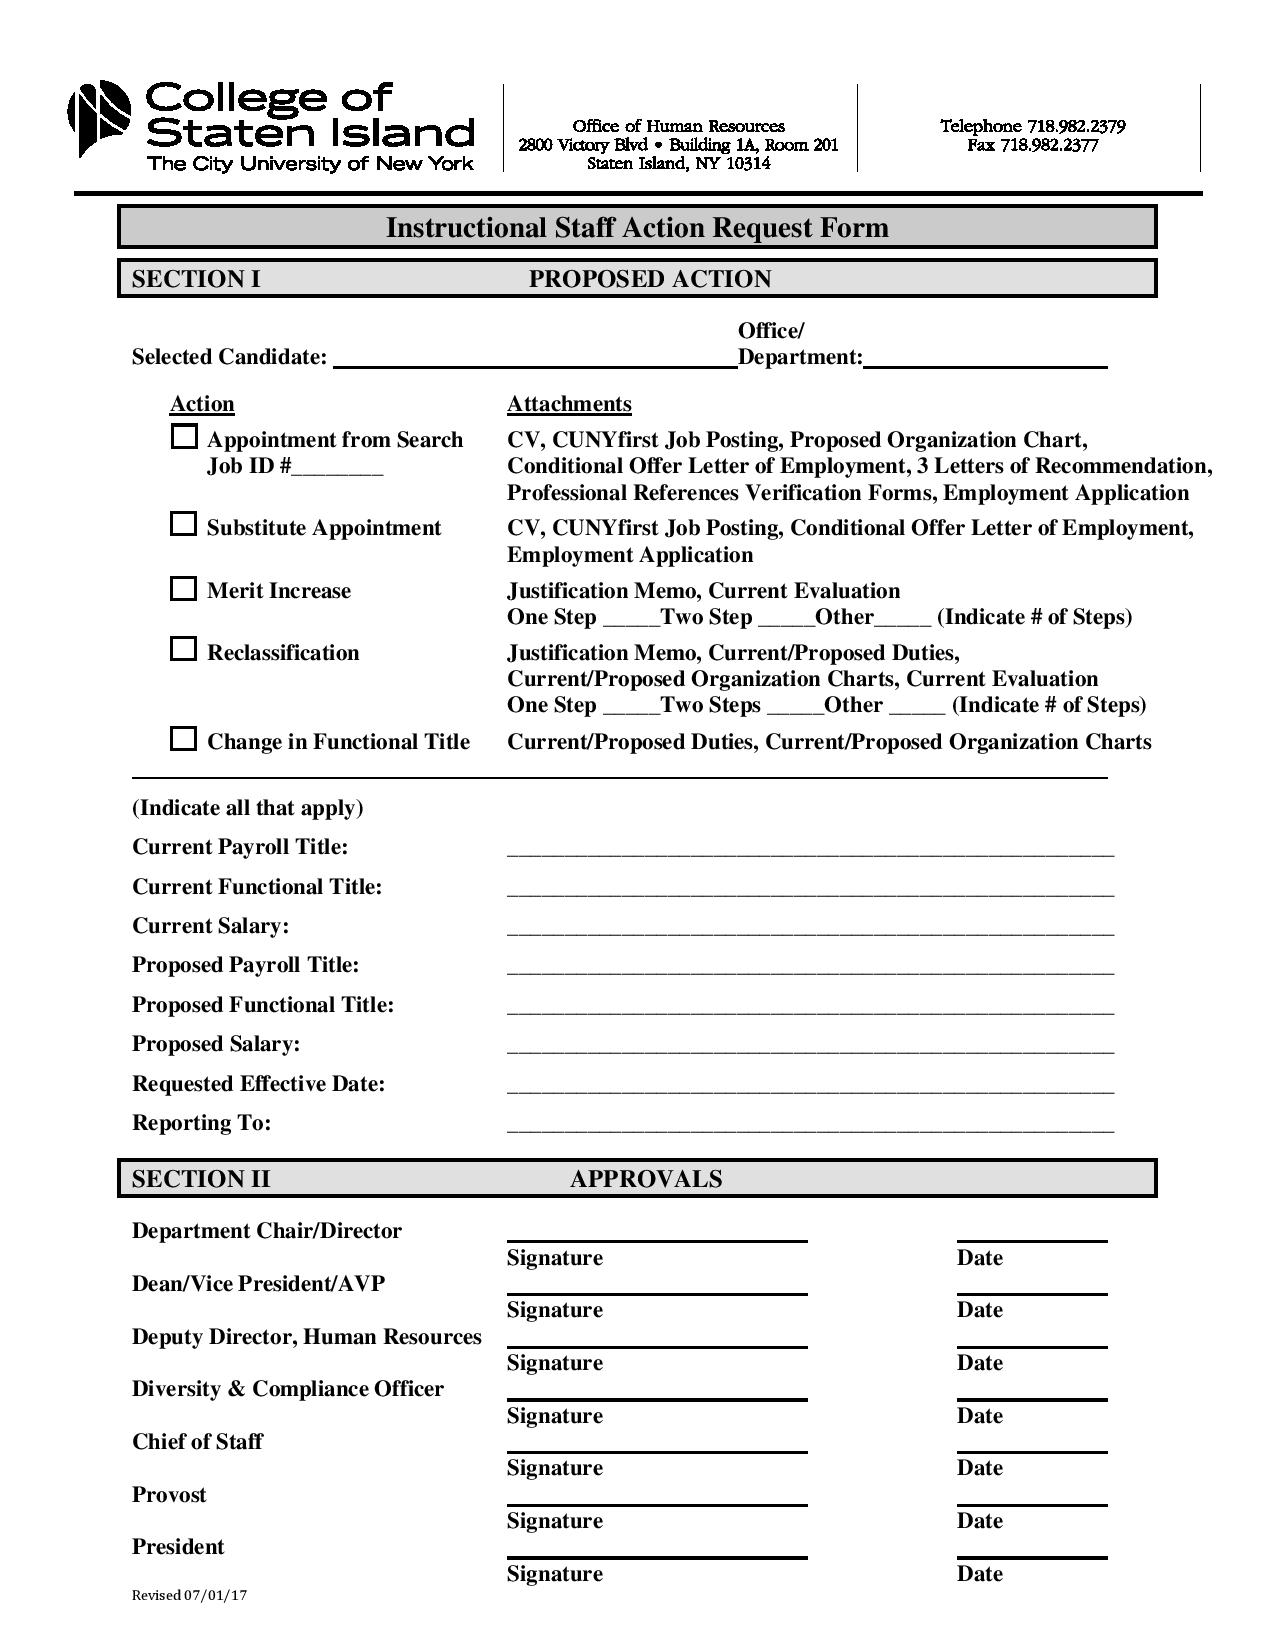 instructional staff action request form page 001